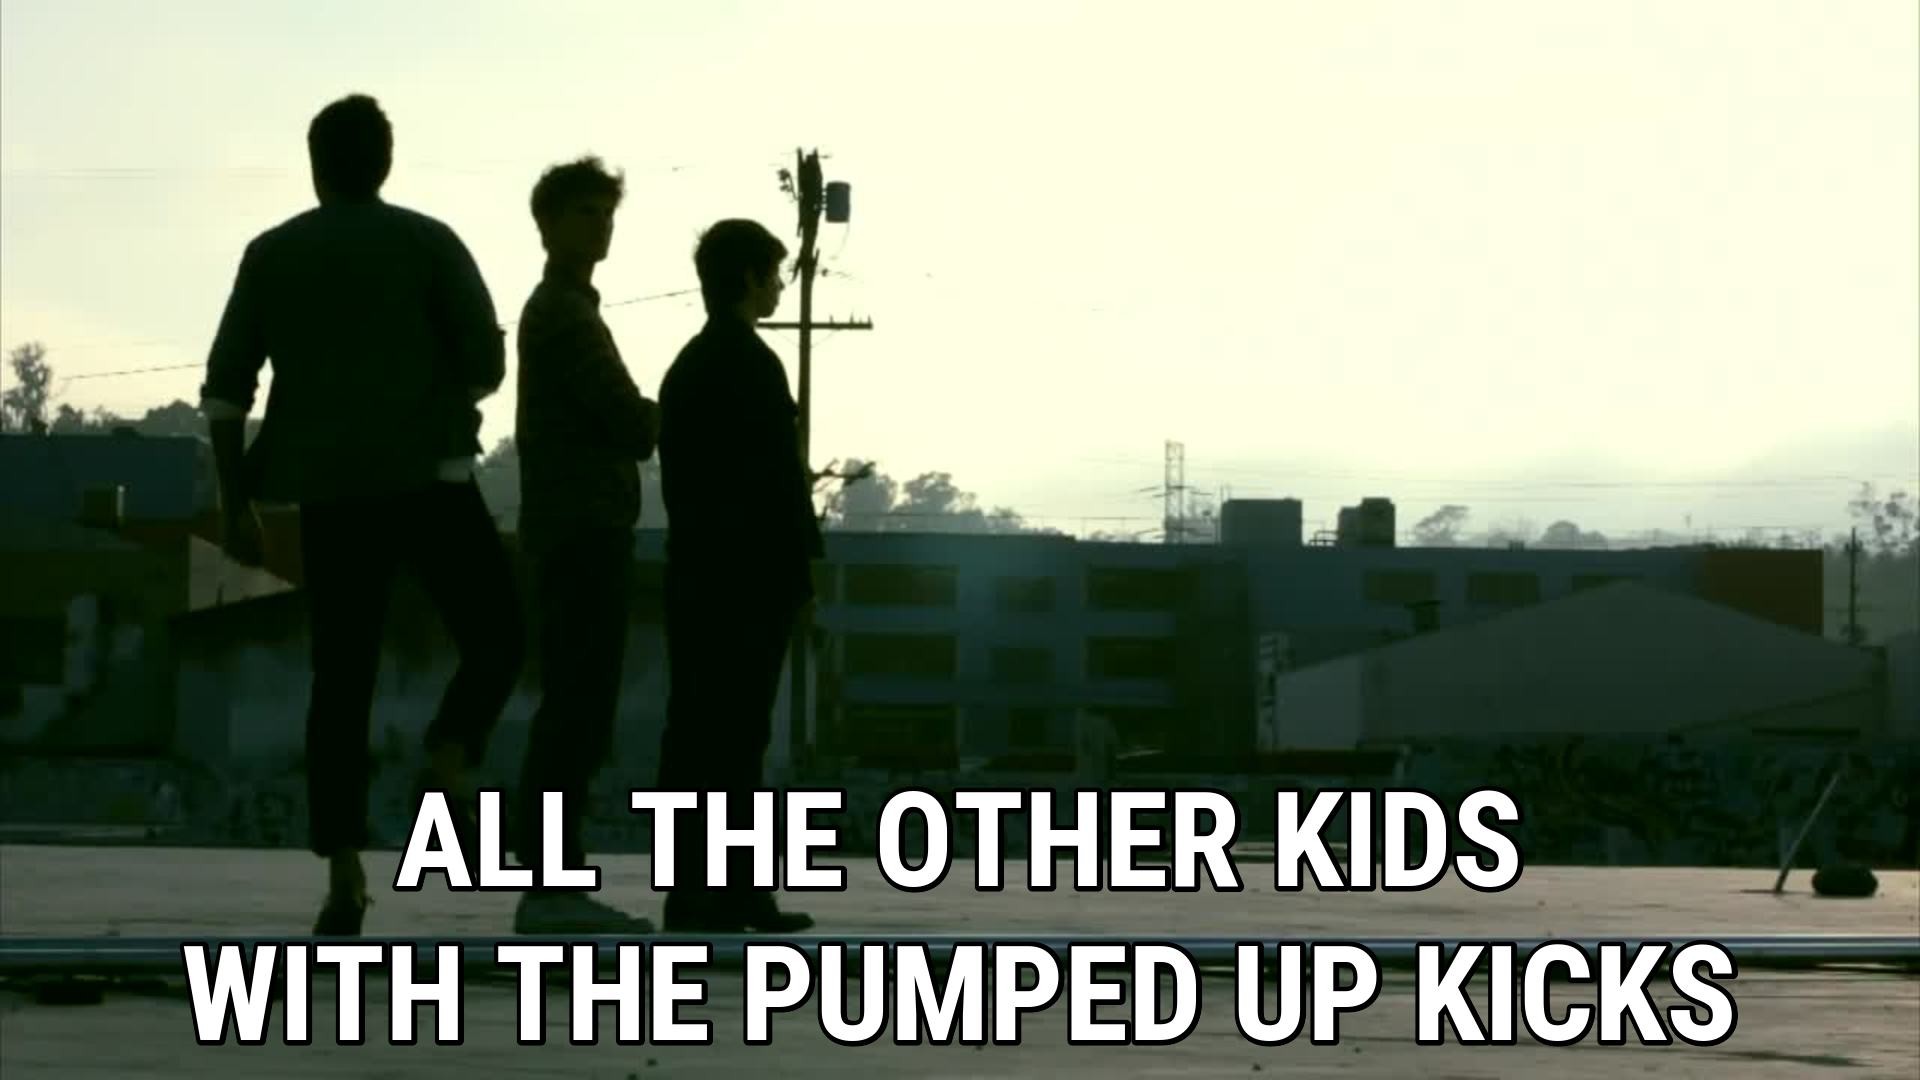 1920x1080 All the other kids with the pumped up kicks